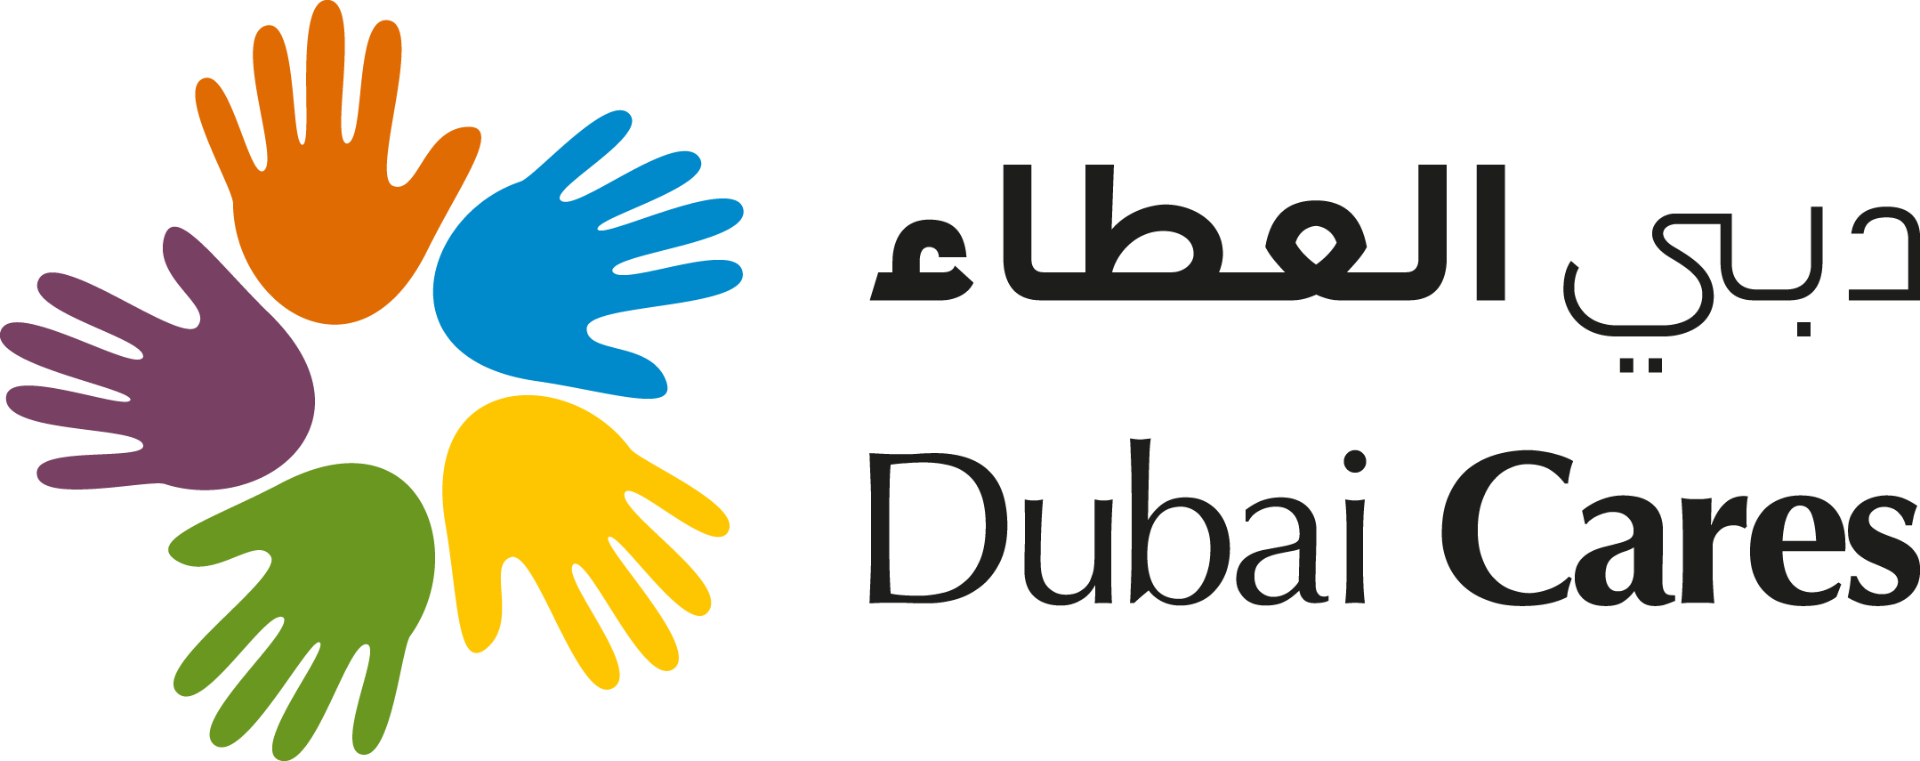 Dubai Cares Logo with org name written in Arabic and English to the right of a circle of hands in purple, orange, blue, yellow, and green. 